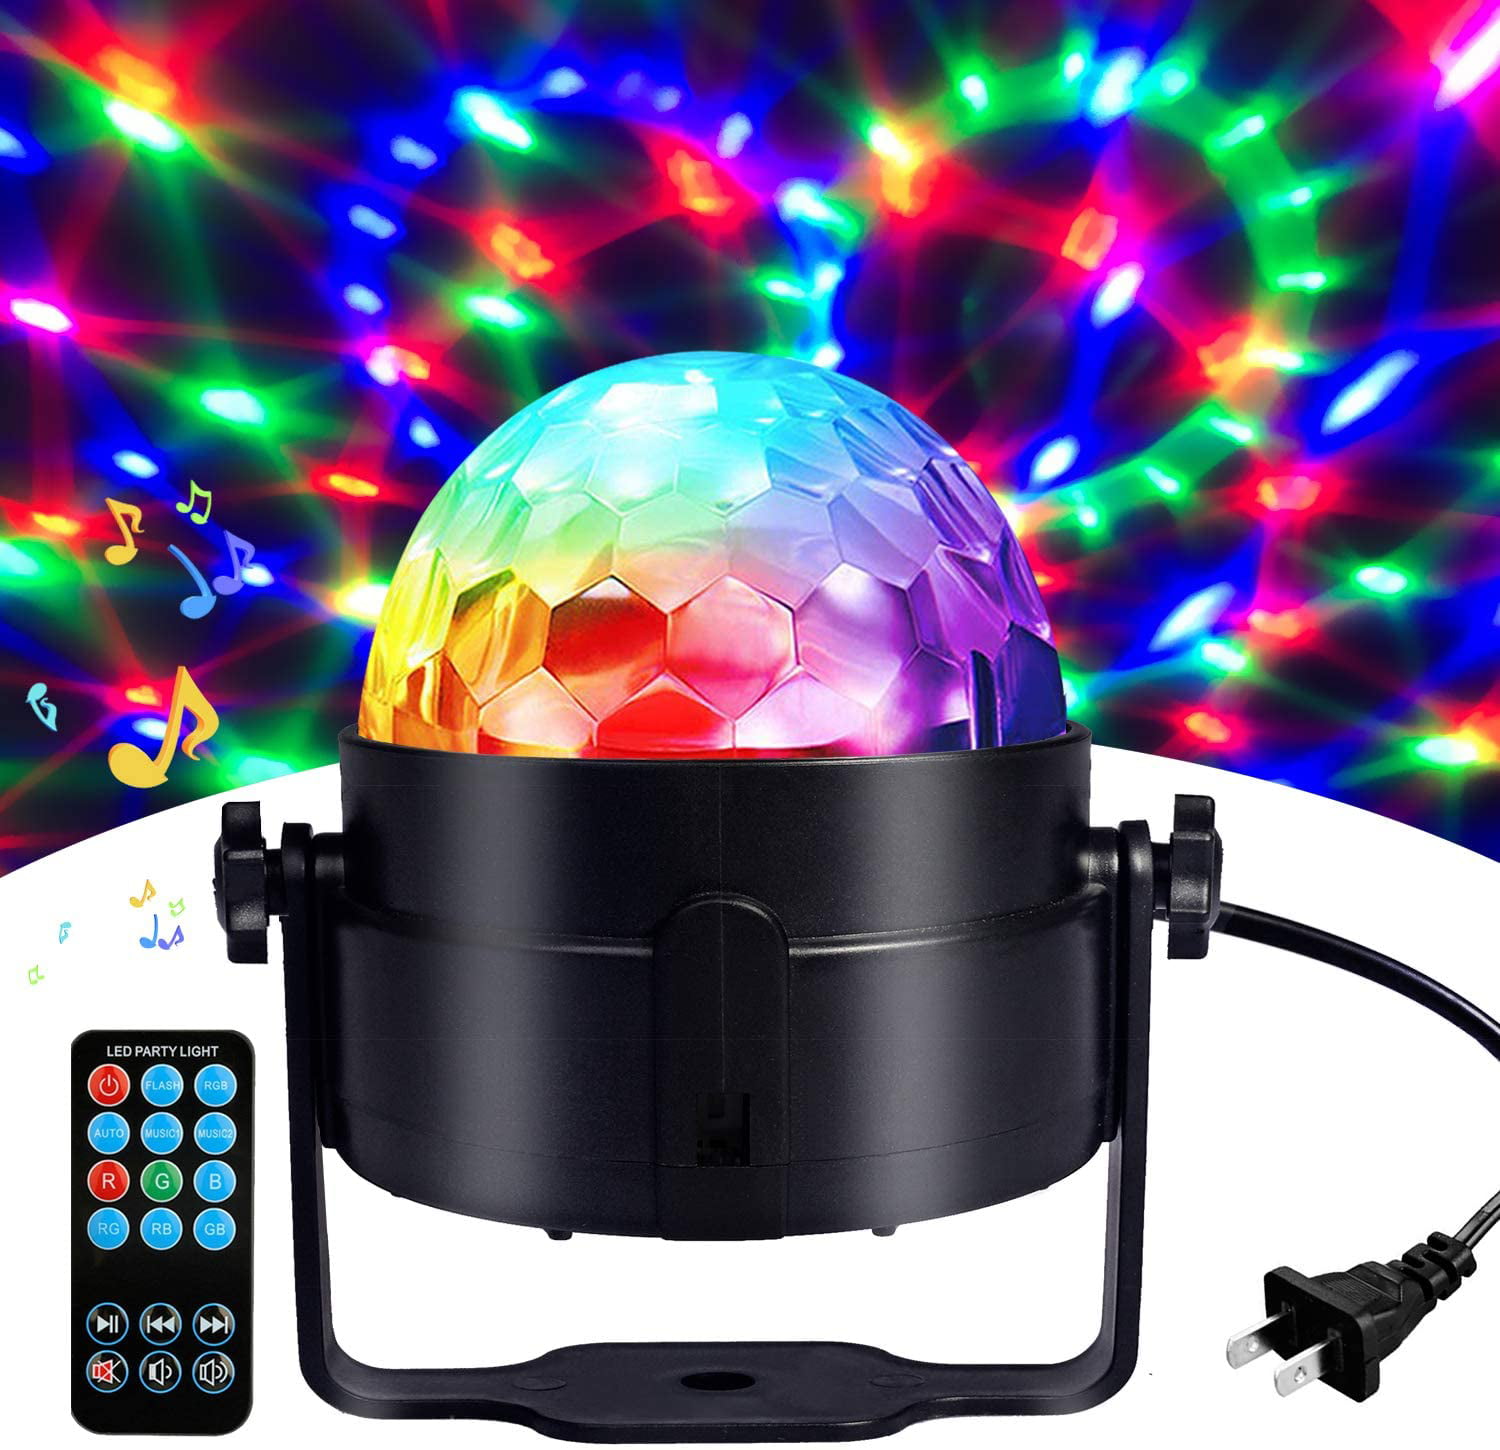 Portable Sound Activated Mini Disco Ball,Party Lights for Bedroom Car Strobe Lights Dj Lights Disco Light Bulb,Led Stage Light,Festival Party Light,Car Decoration Disco Ball